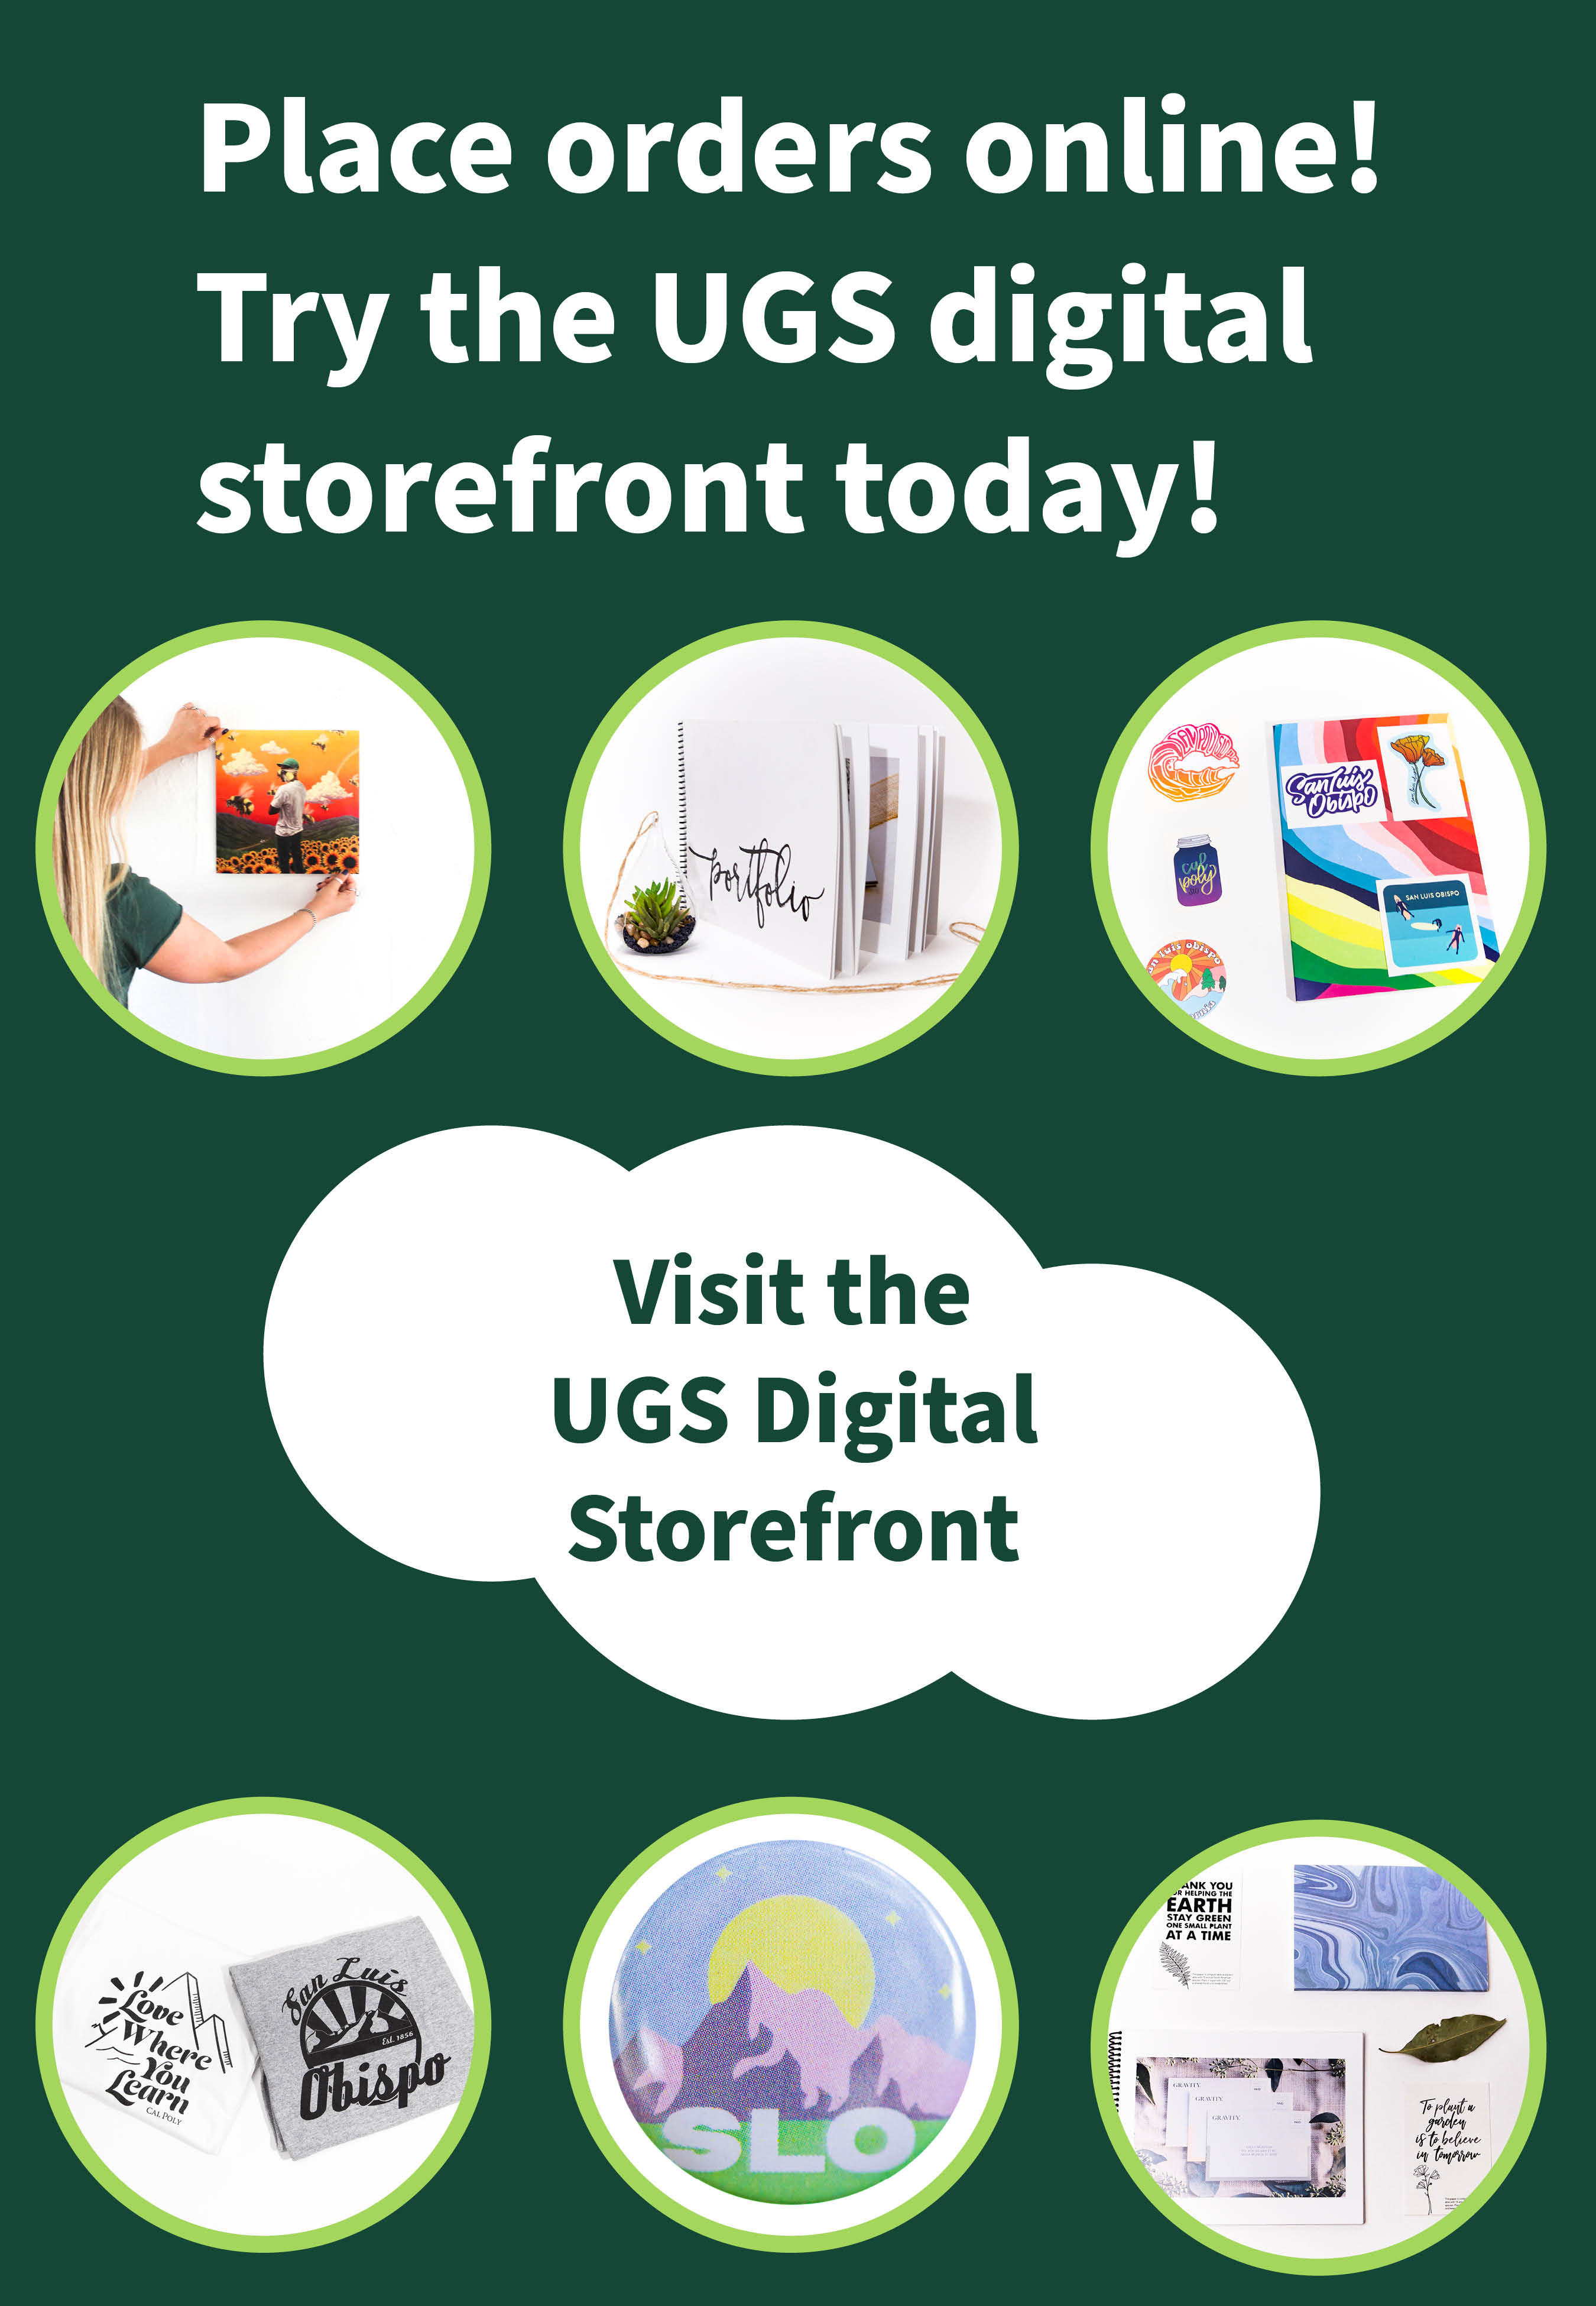 Place orders online! Try the new UGS digital storefront today. Six photos of various print products. Button that says visit the UGS digital storefront.